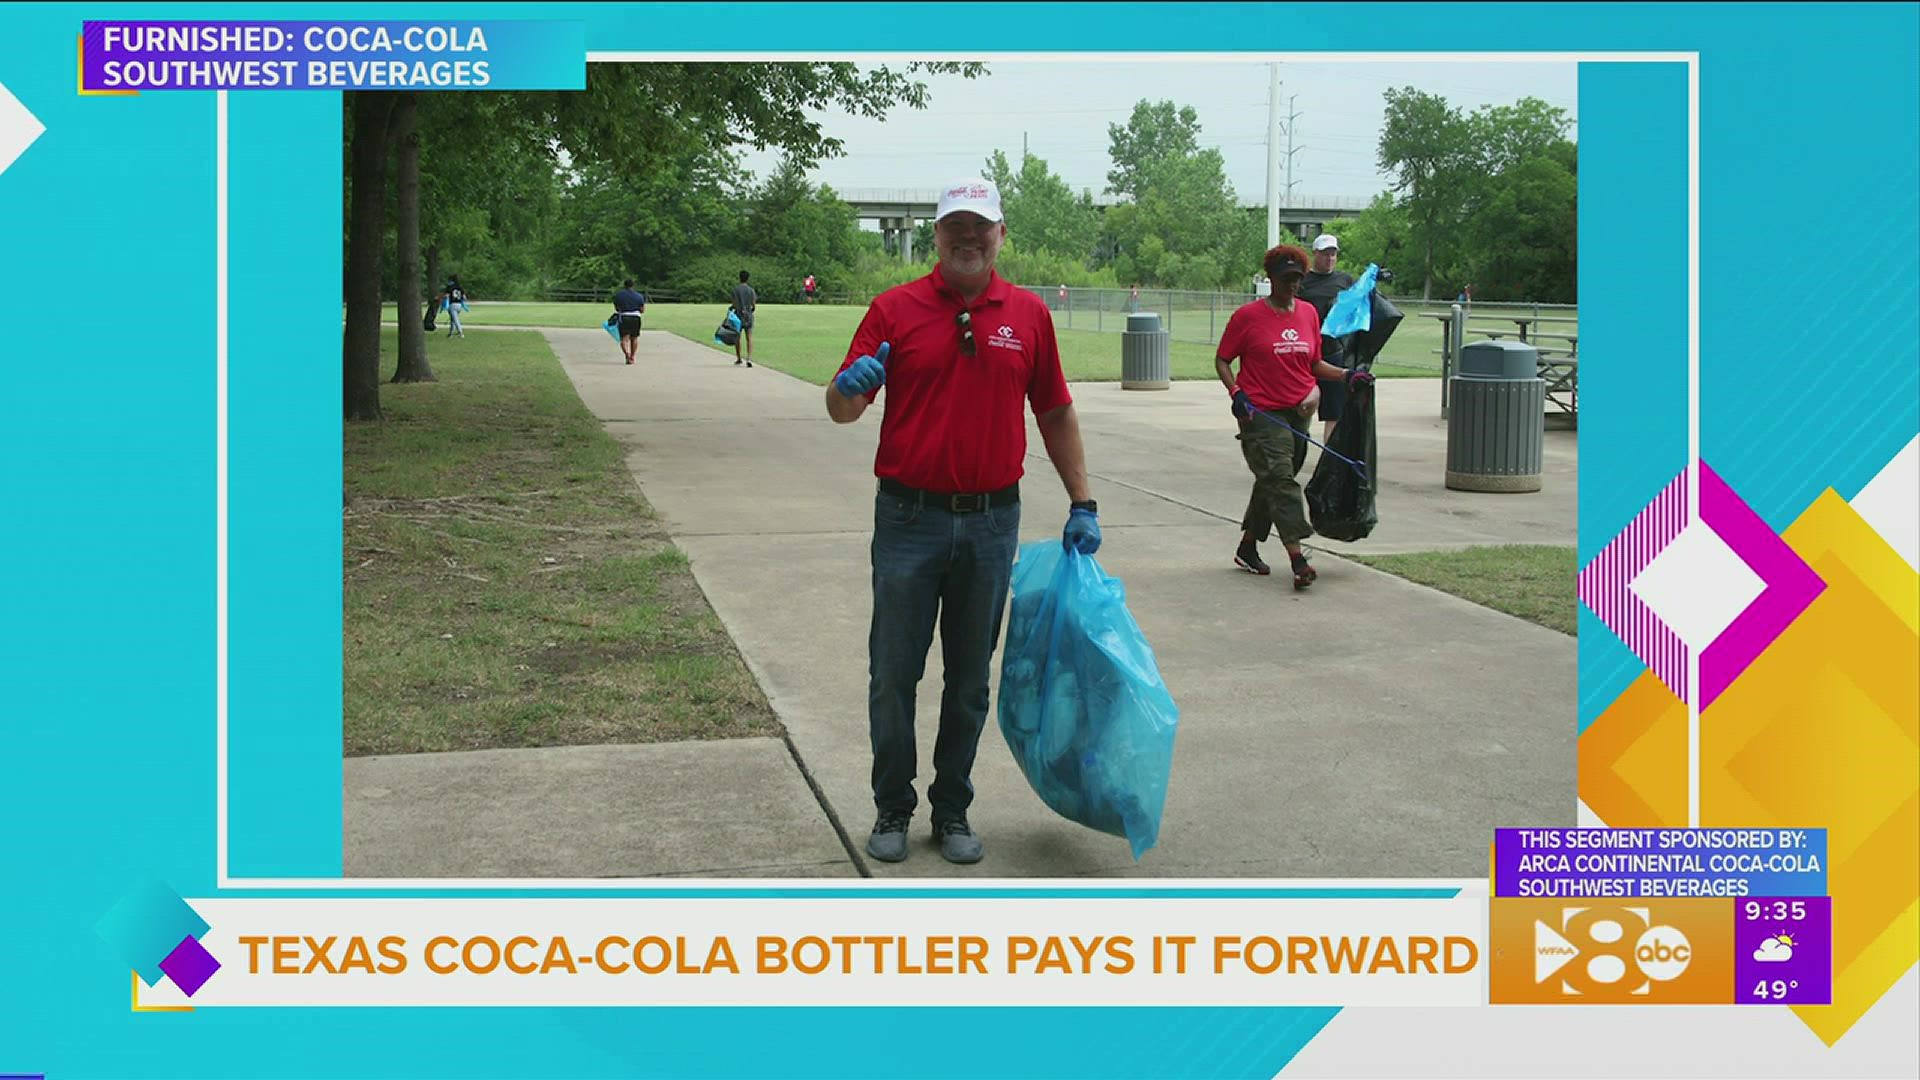 This segment is sponsored by Arca Continental Coca-Cola Southwest Beverages.